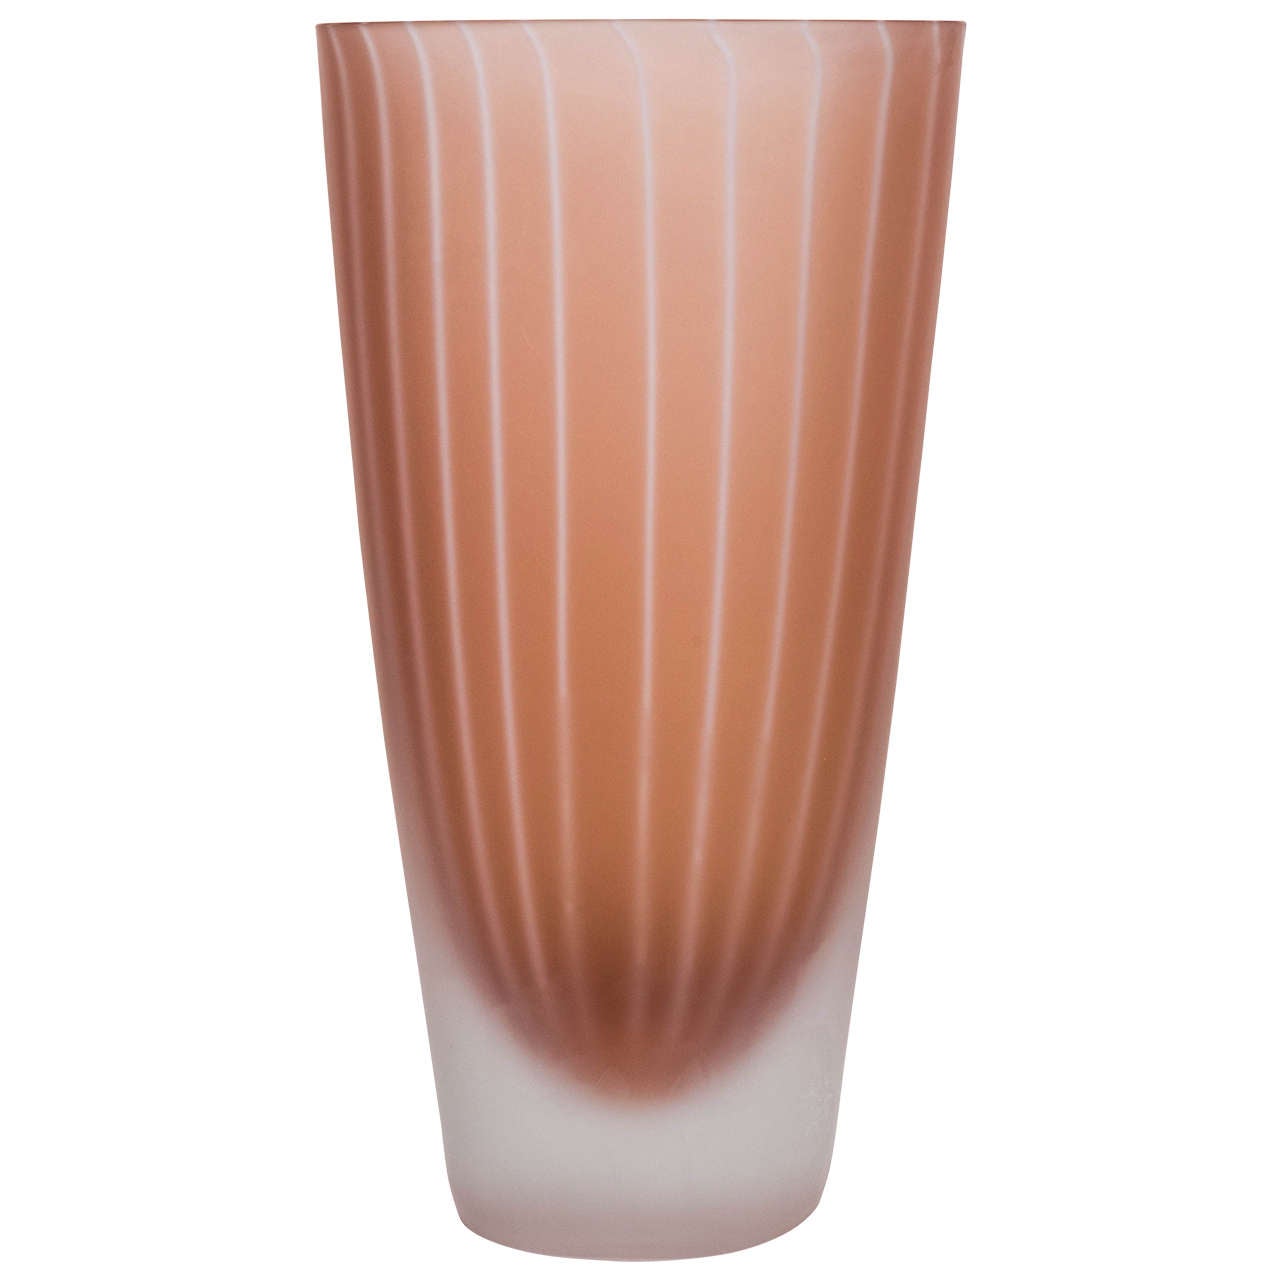 Mid-Century Murano Glass "Sommerso" Vase in Dark Peach with White Stripes